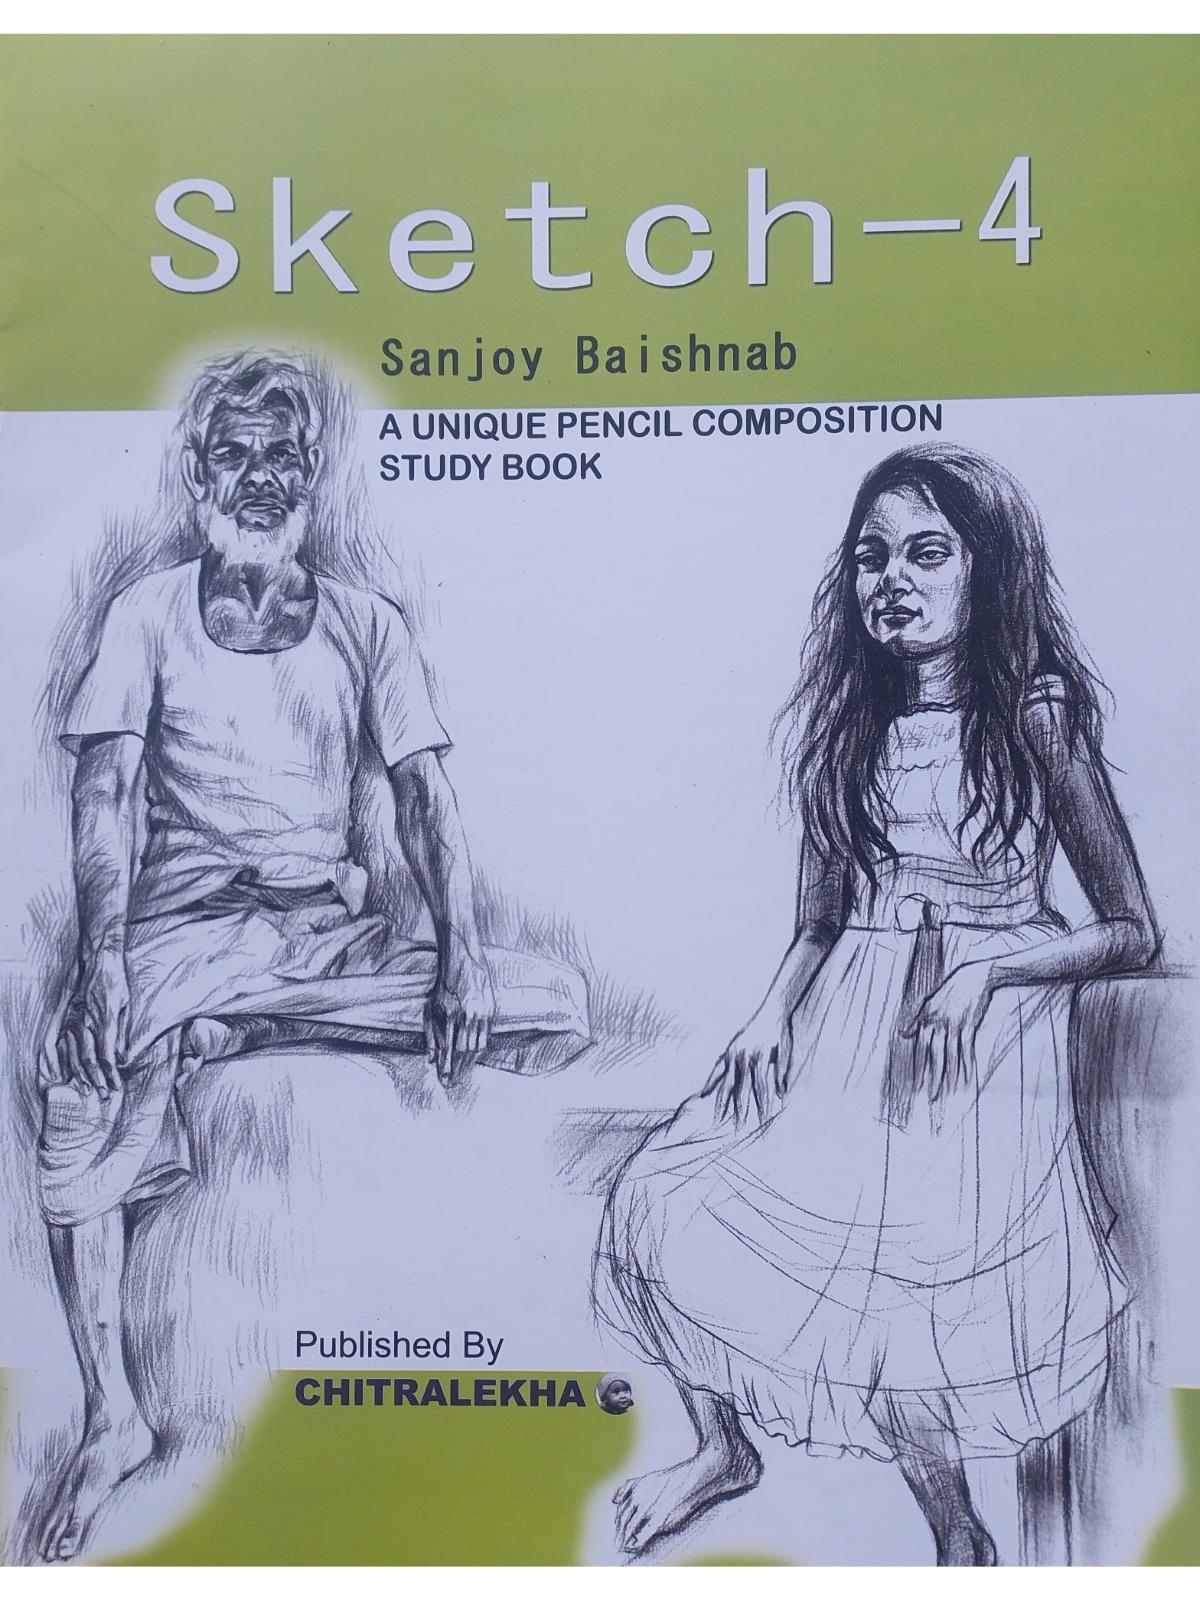 Pin by Apurv on Drawings | Composition drawing, Human figure sketches,  Figure sketching